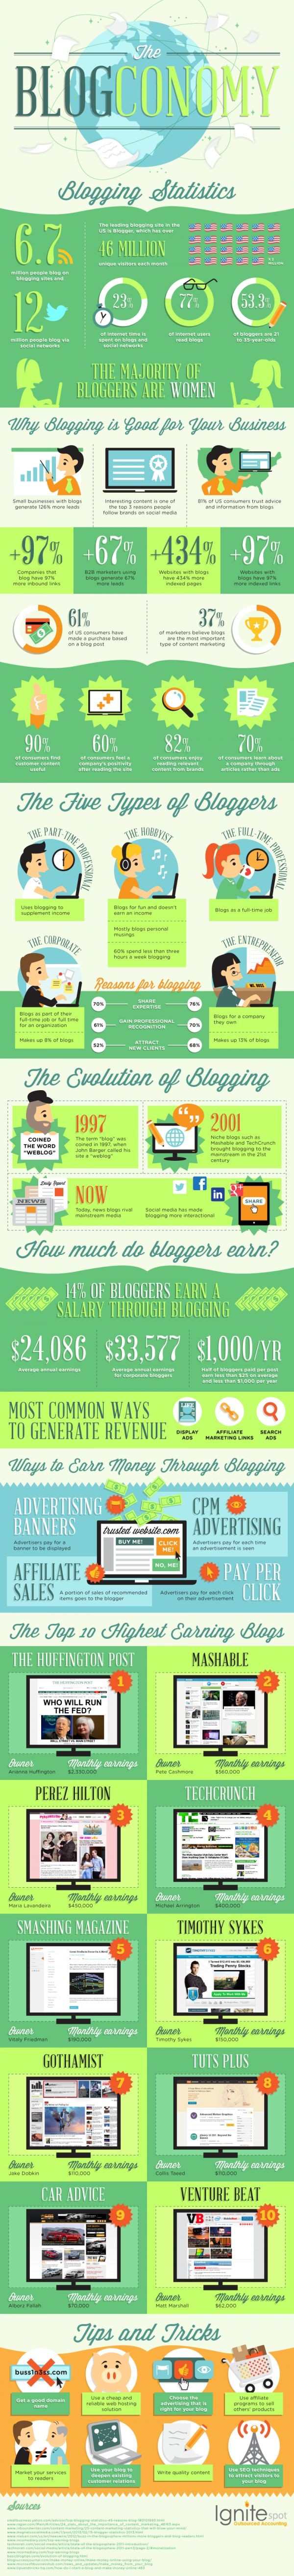 40 Facts on Blogs Every Business Needs to Know to...